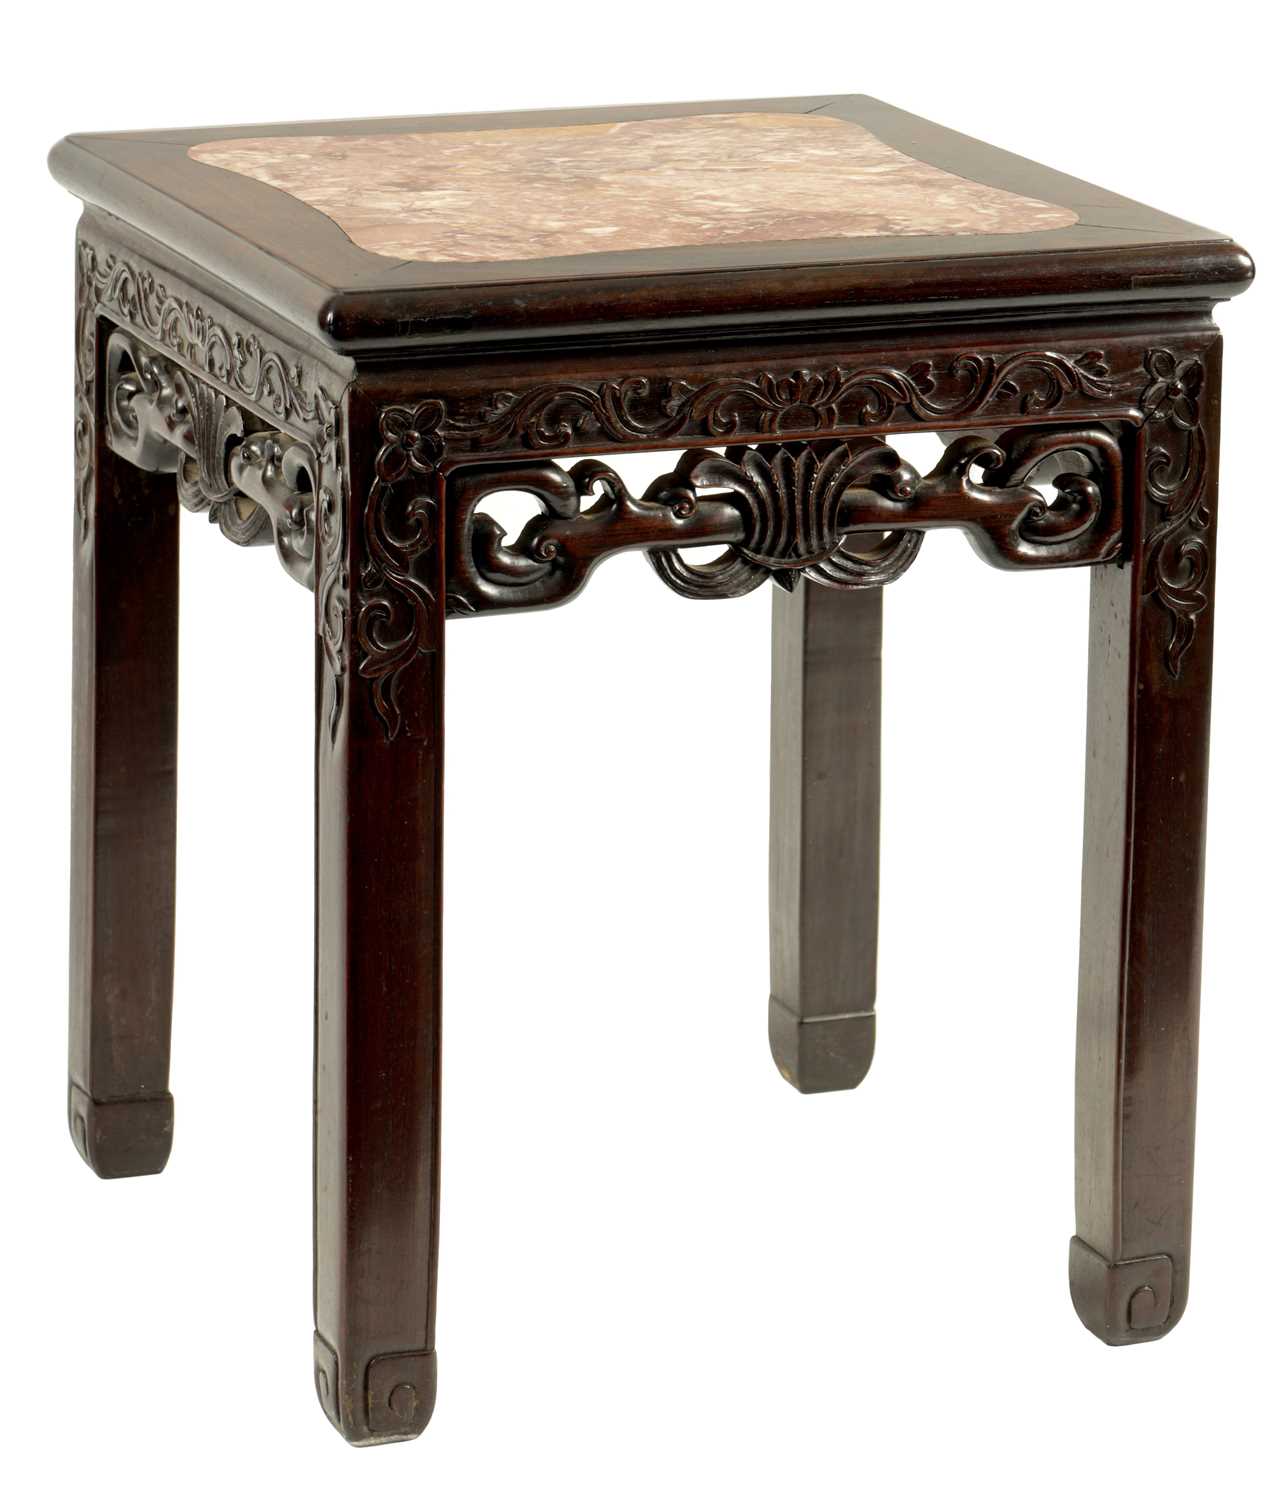 A 19TH CENTURY CHINESE HARDWOOD JARDINIERE TABLE